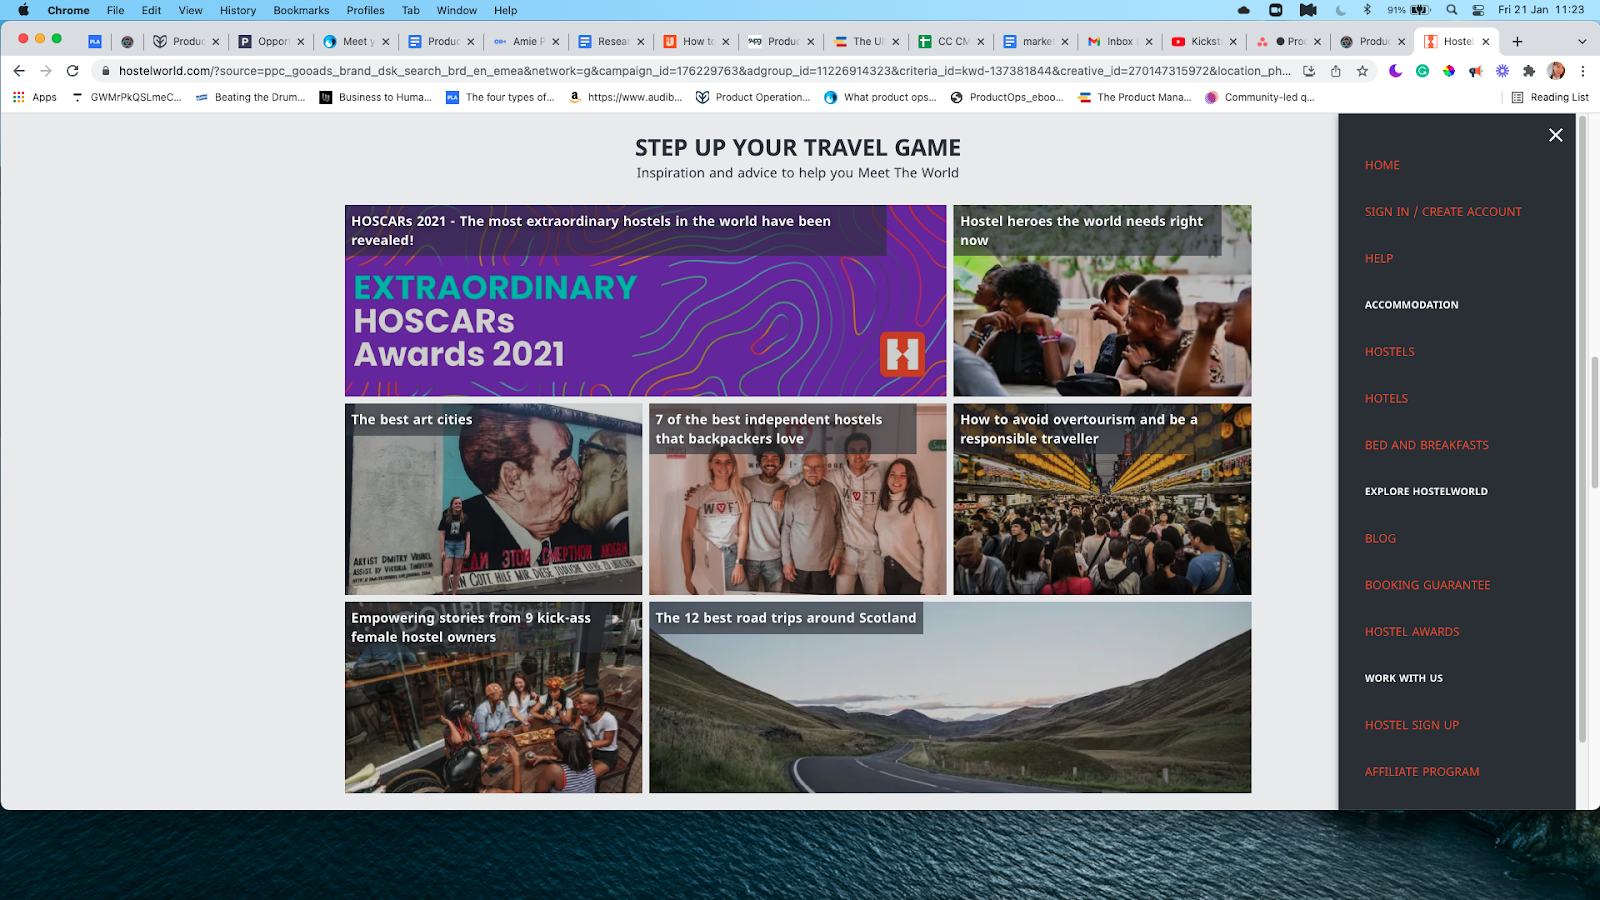 screenshot showing a number of travel articles with titles such as ‘the best art cities’, the 12 best road trips around scotland, and ‘how to avoid overtourism and be a responsible traveler’.